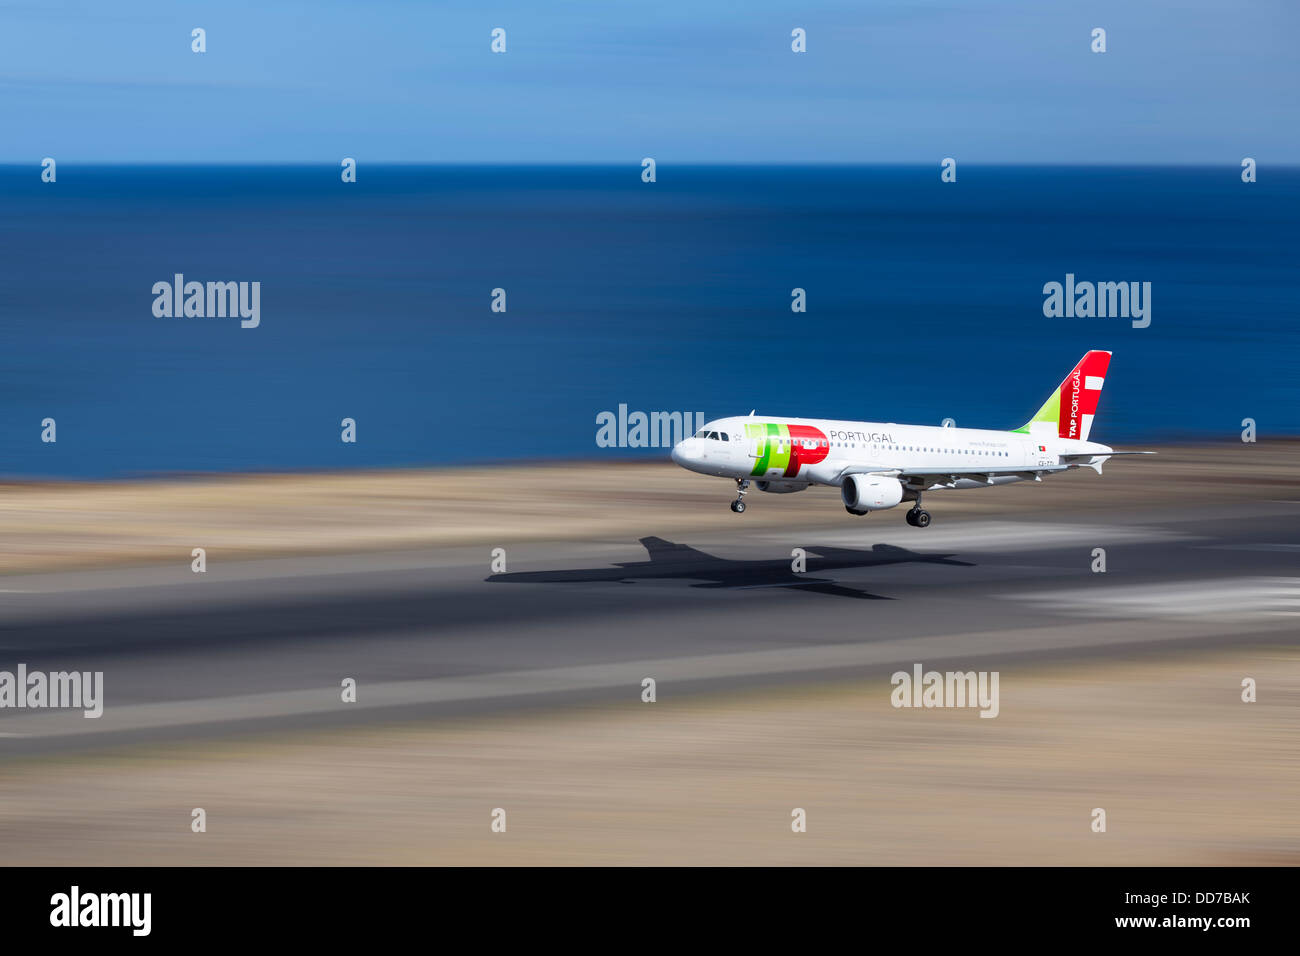 Portugal, Madeira, View of Airbus aeroplane landing at airport Stock Photo